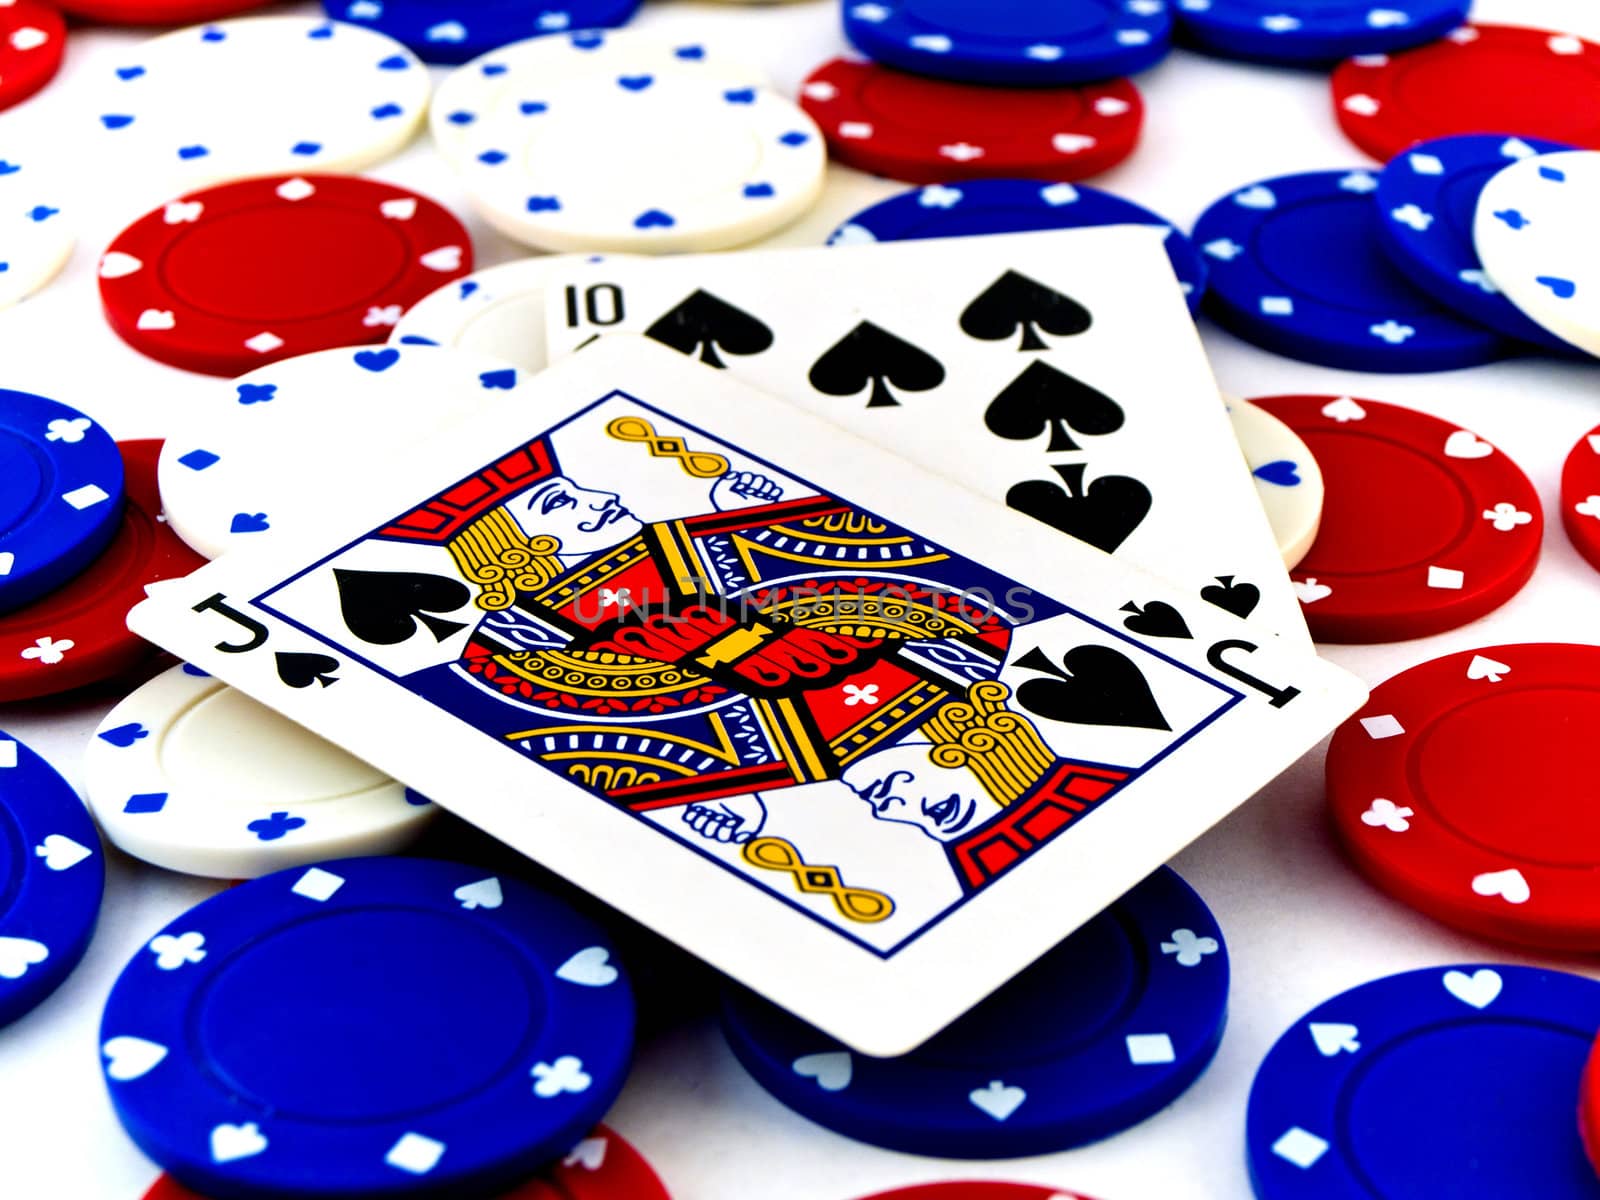 Red White and Blue Poker Chips and Black Jack on White Backgroun by bobbigmac